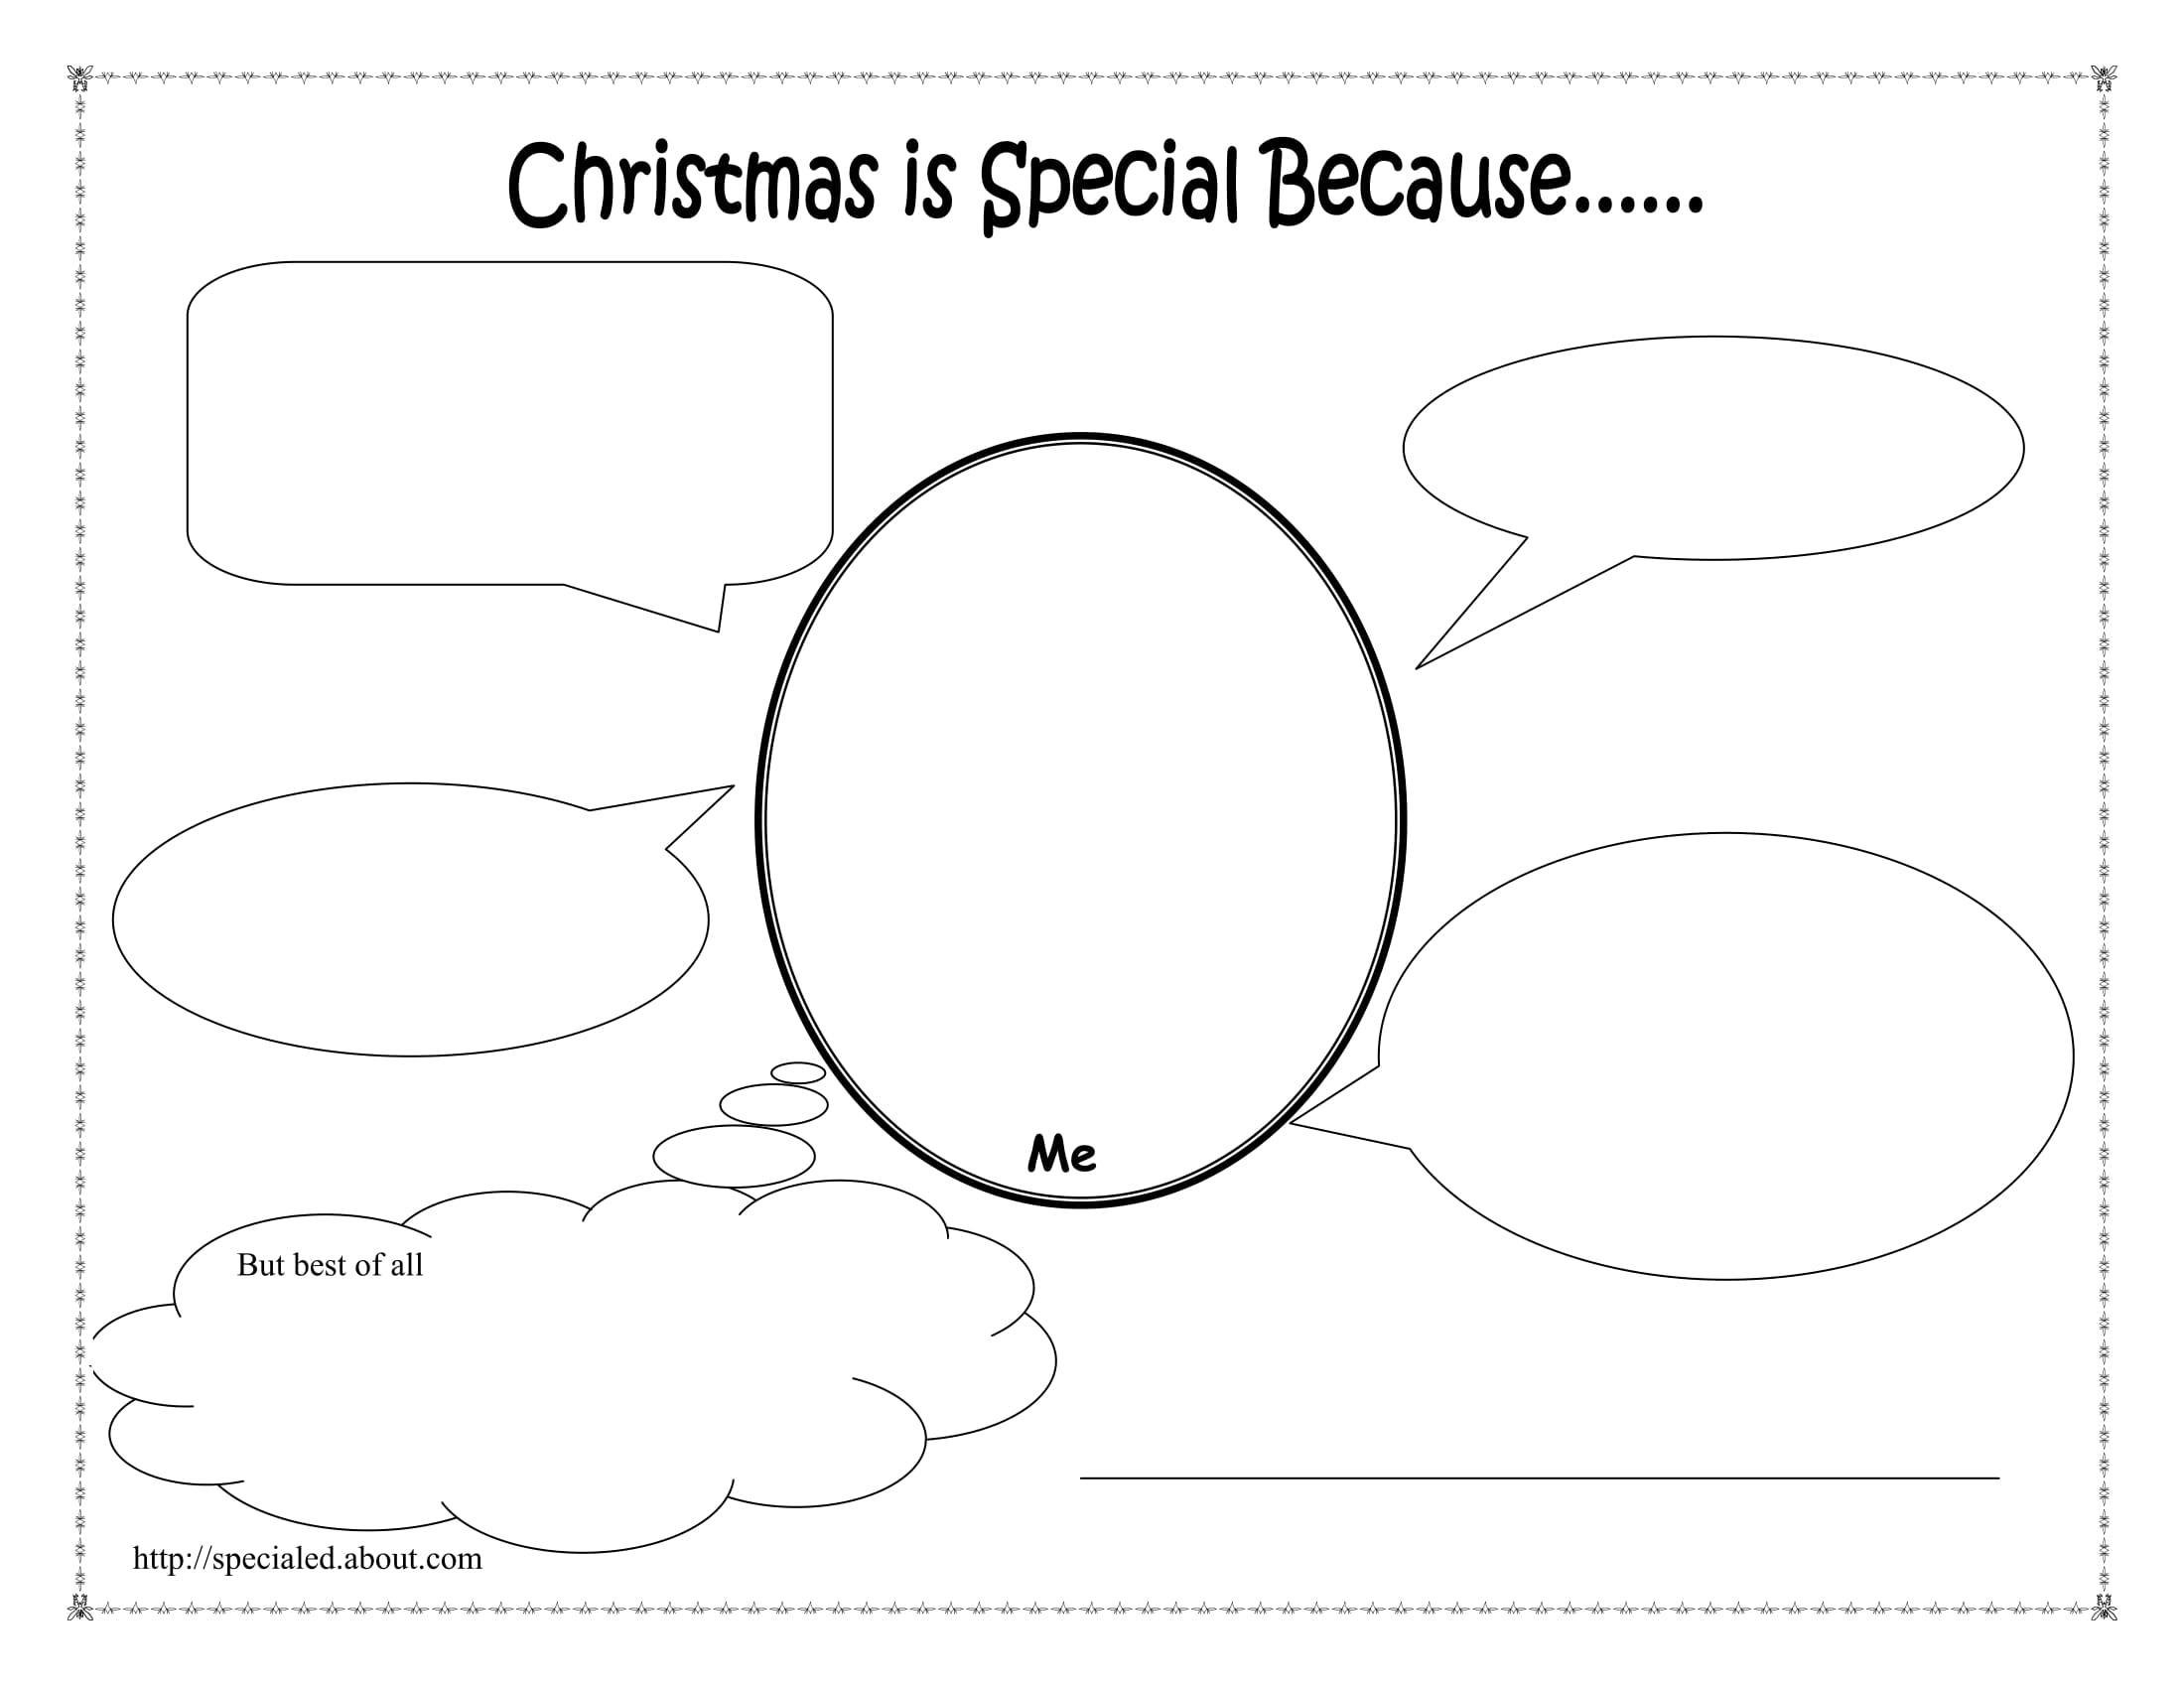 Christmas Activities Worksheets And Lesson Plans In Christmas Worksheets For Middle School